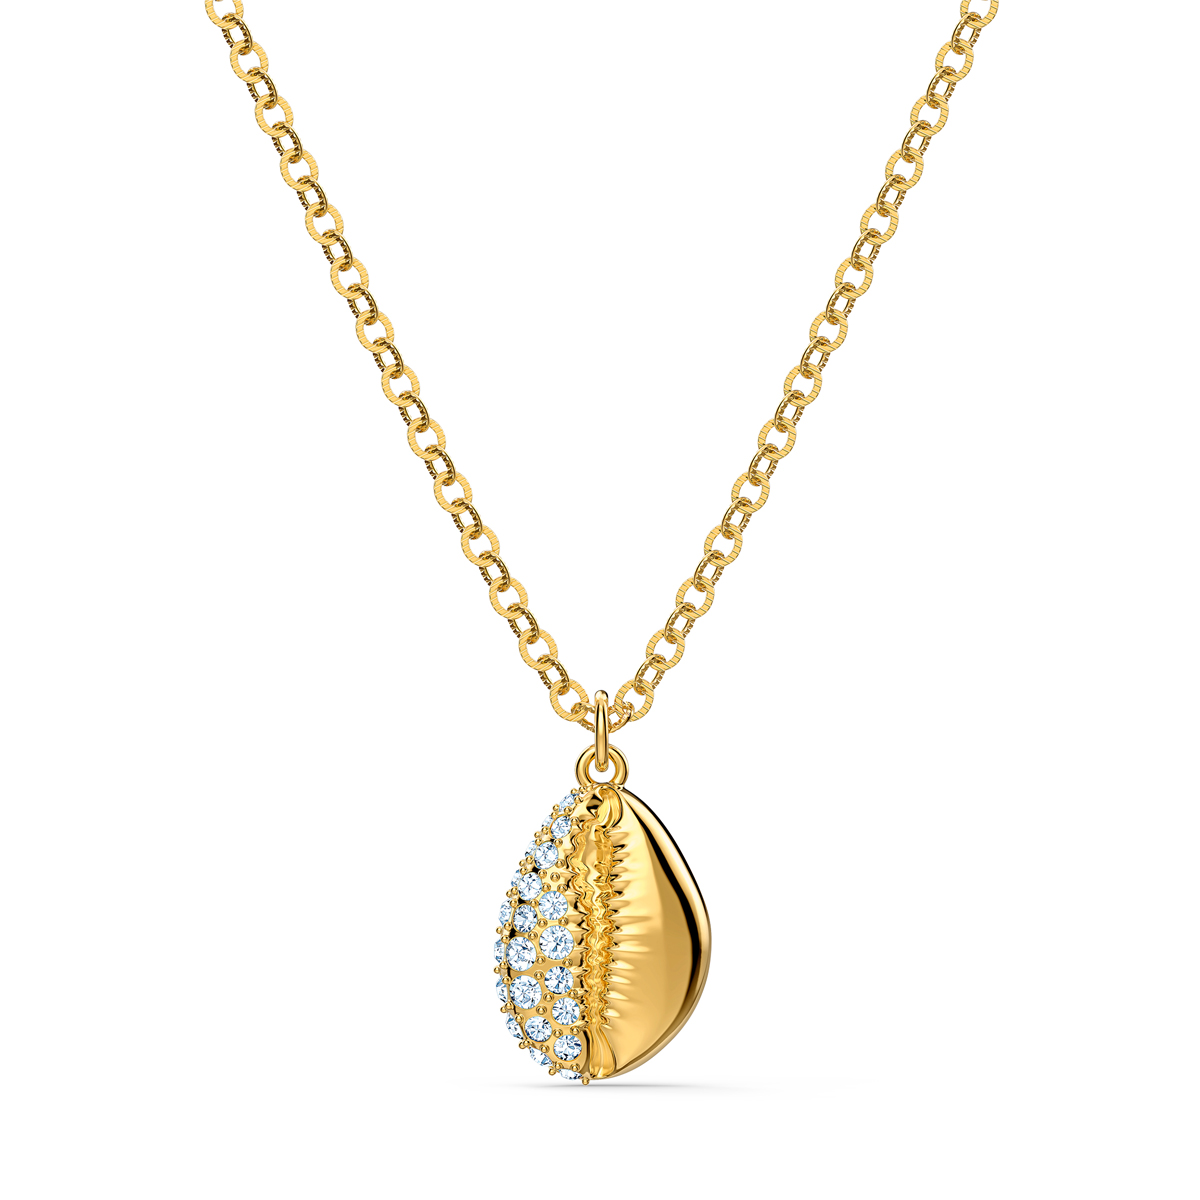 Swarovski Gold and Crystal Shell Pendant Necklace